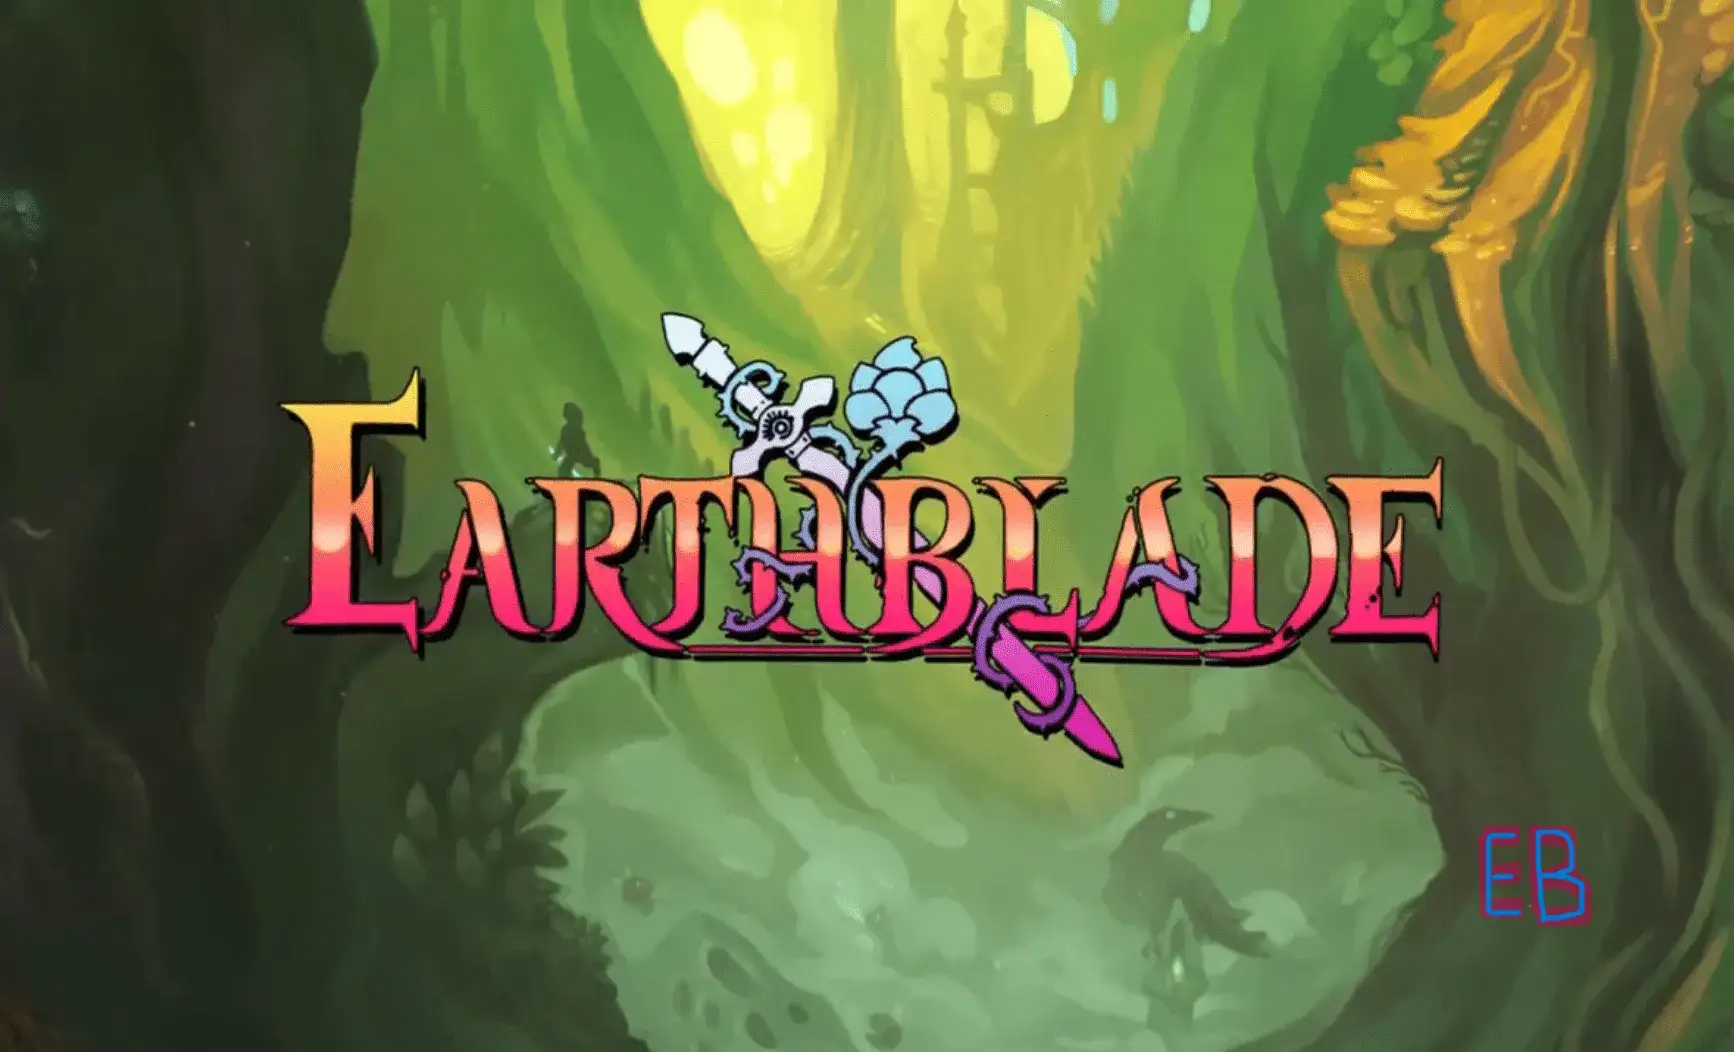 Earthblade System Requirements